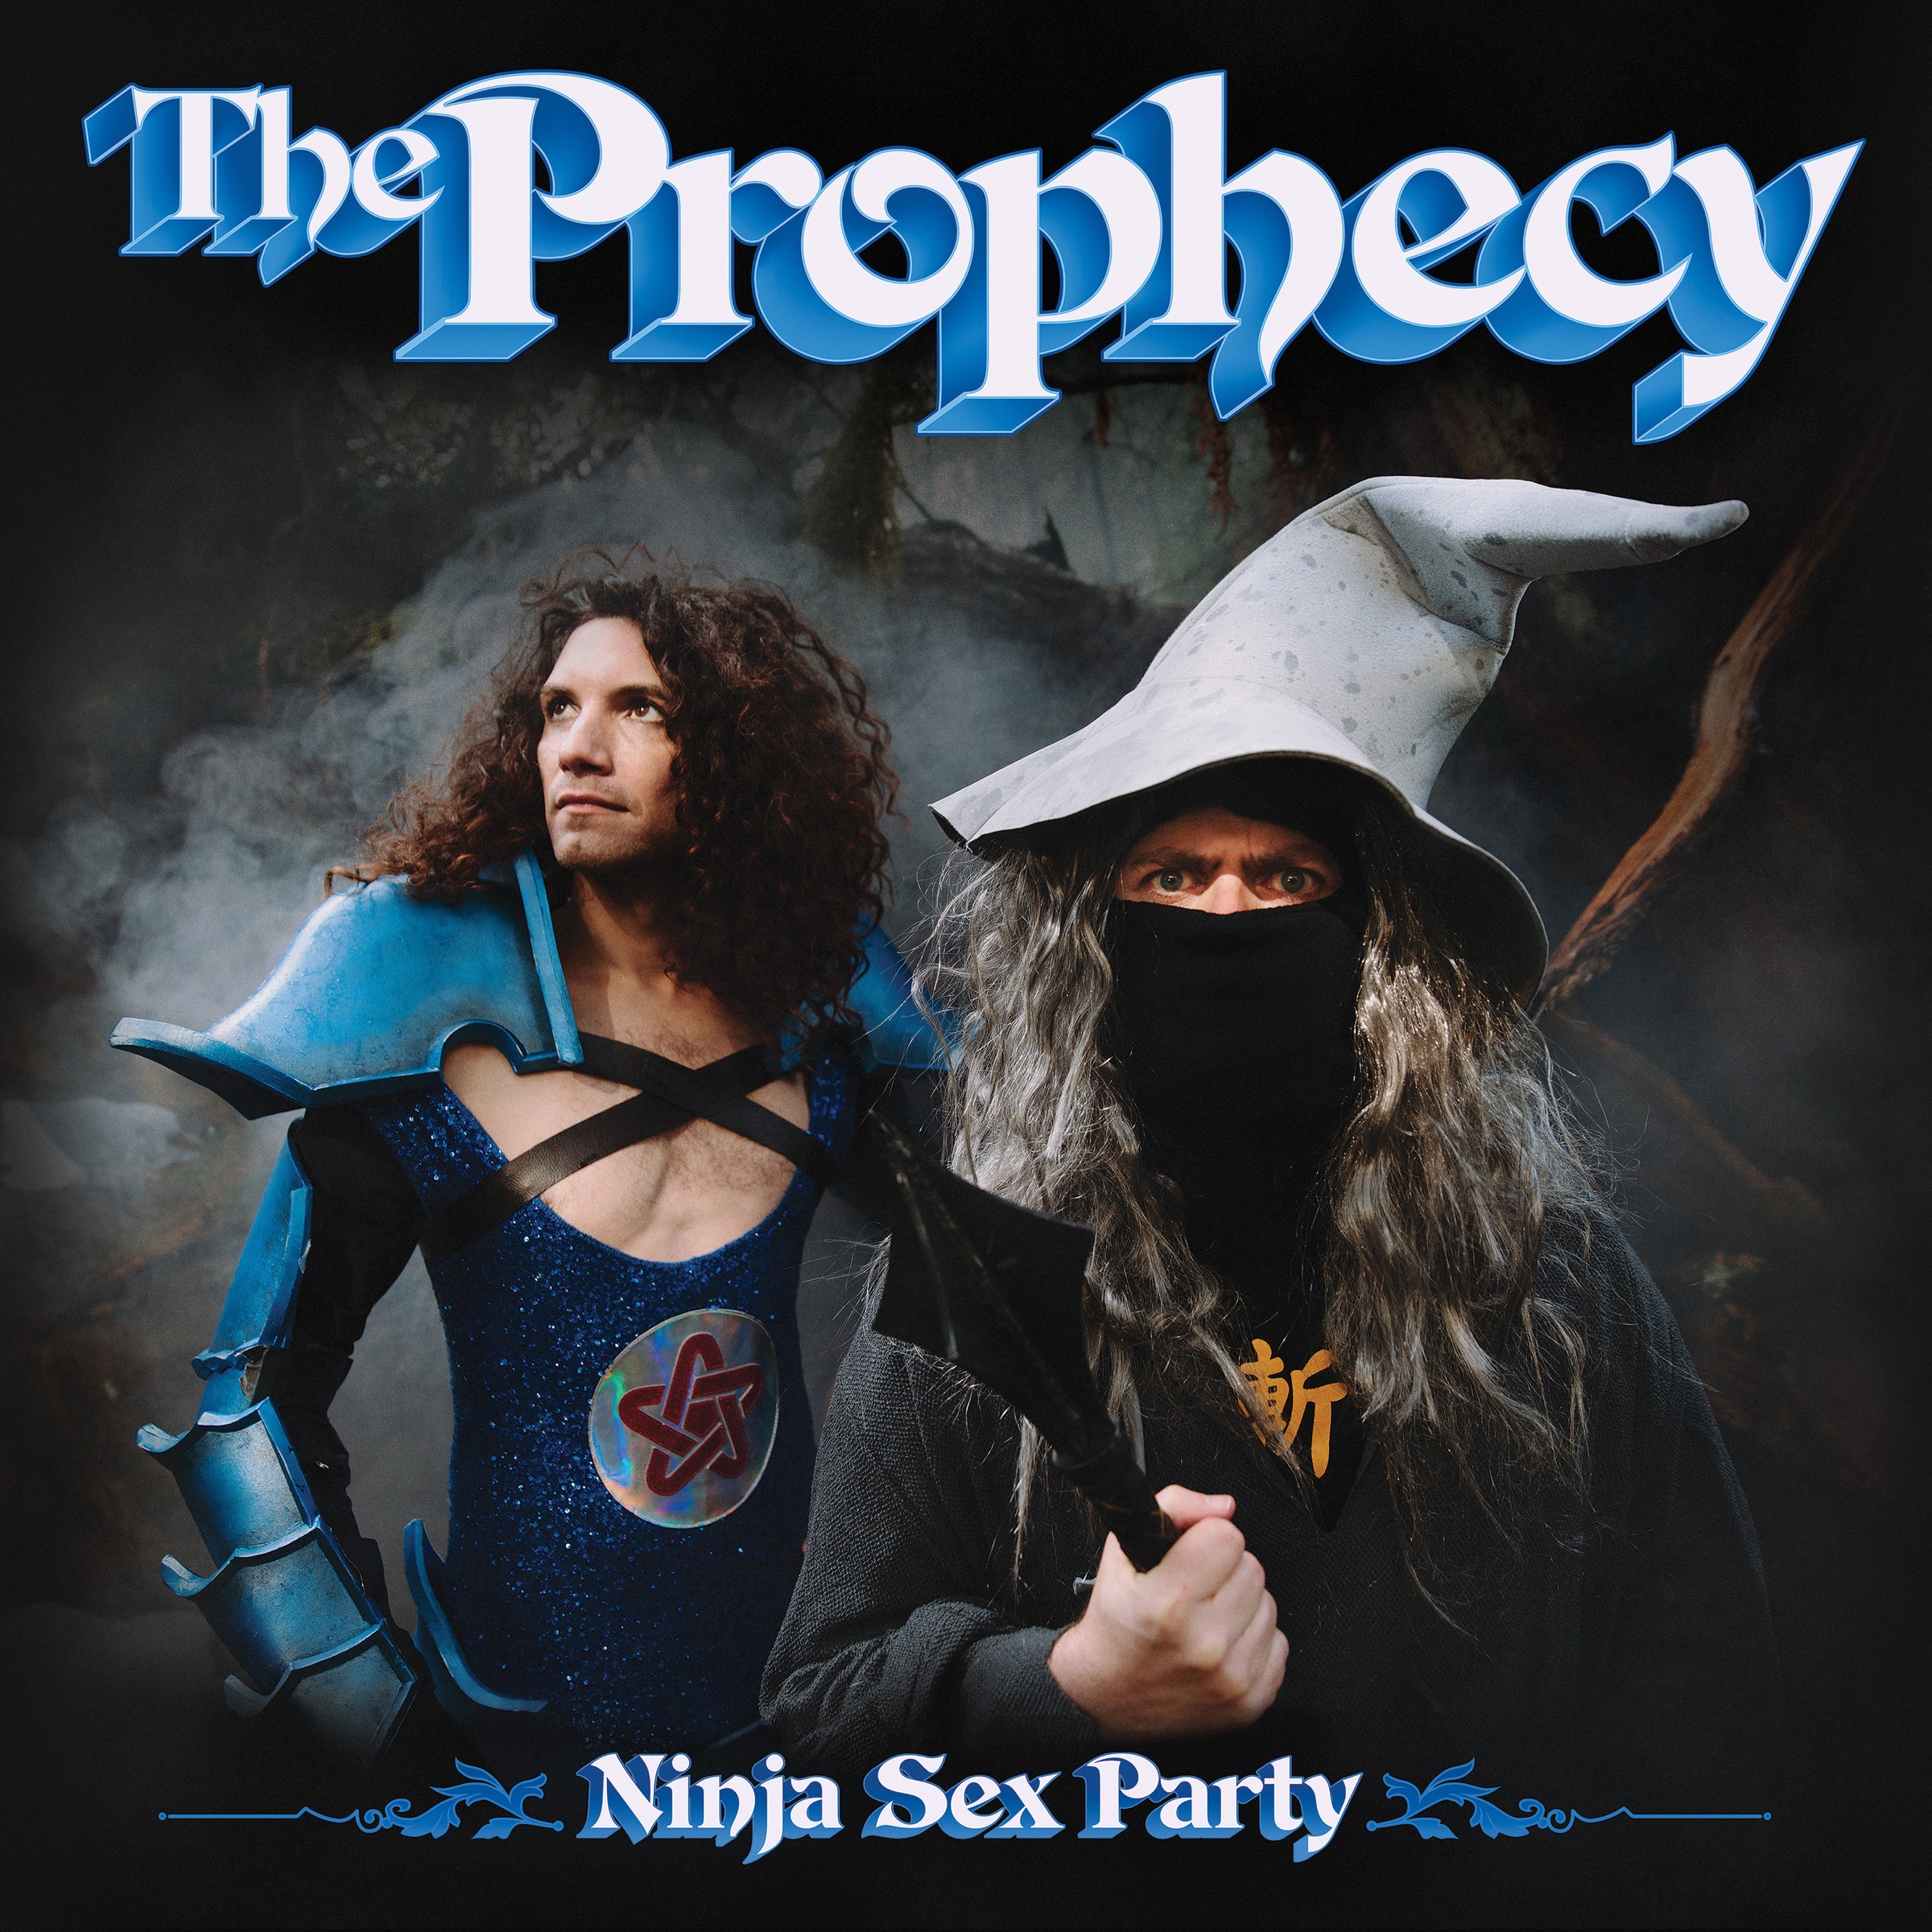 Ninja Sex Party The Prophecy cover artwork